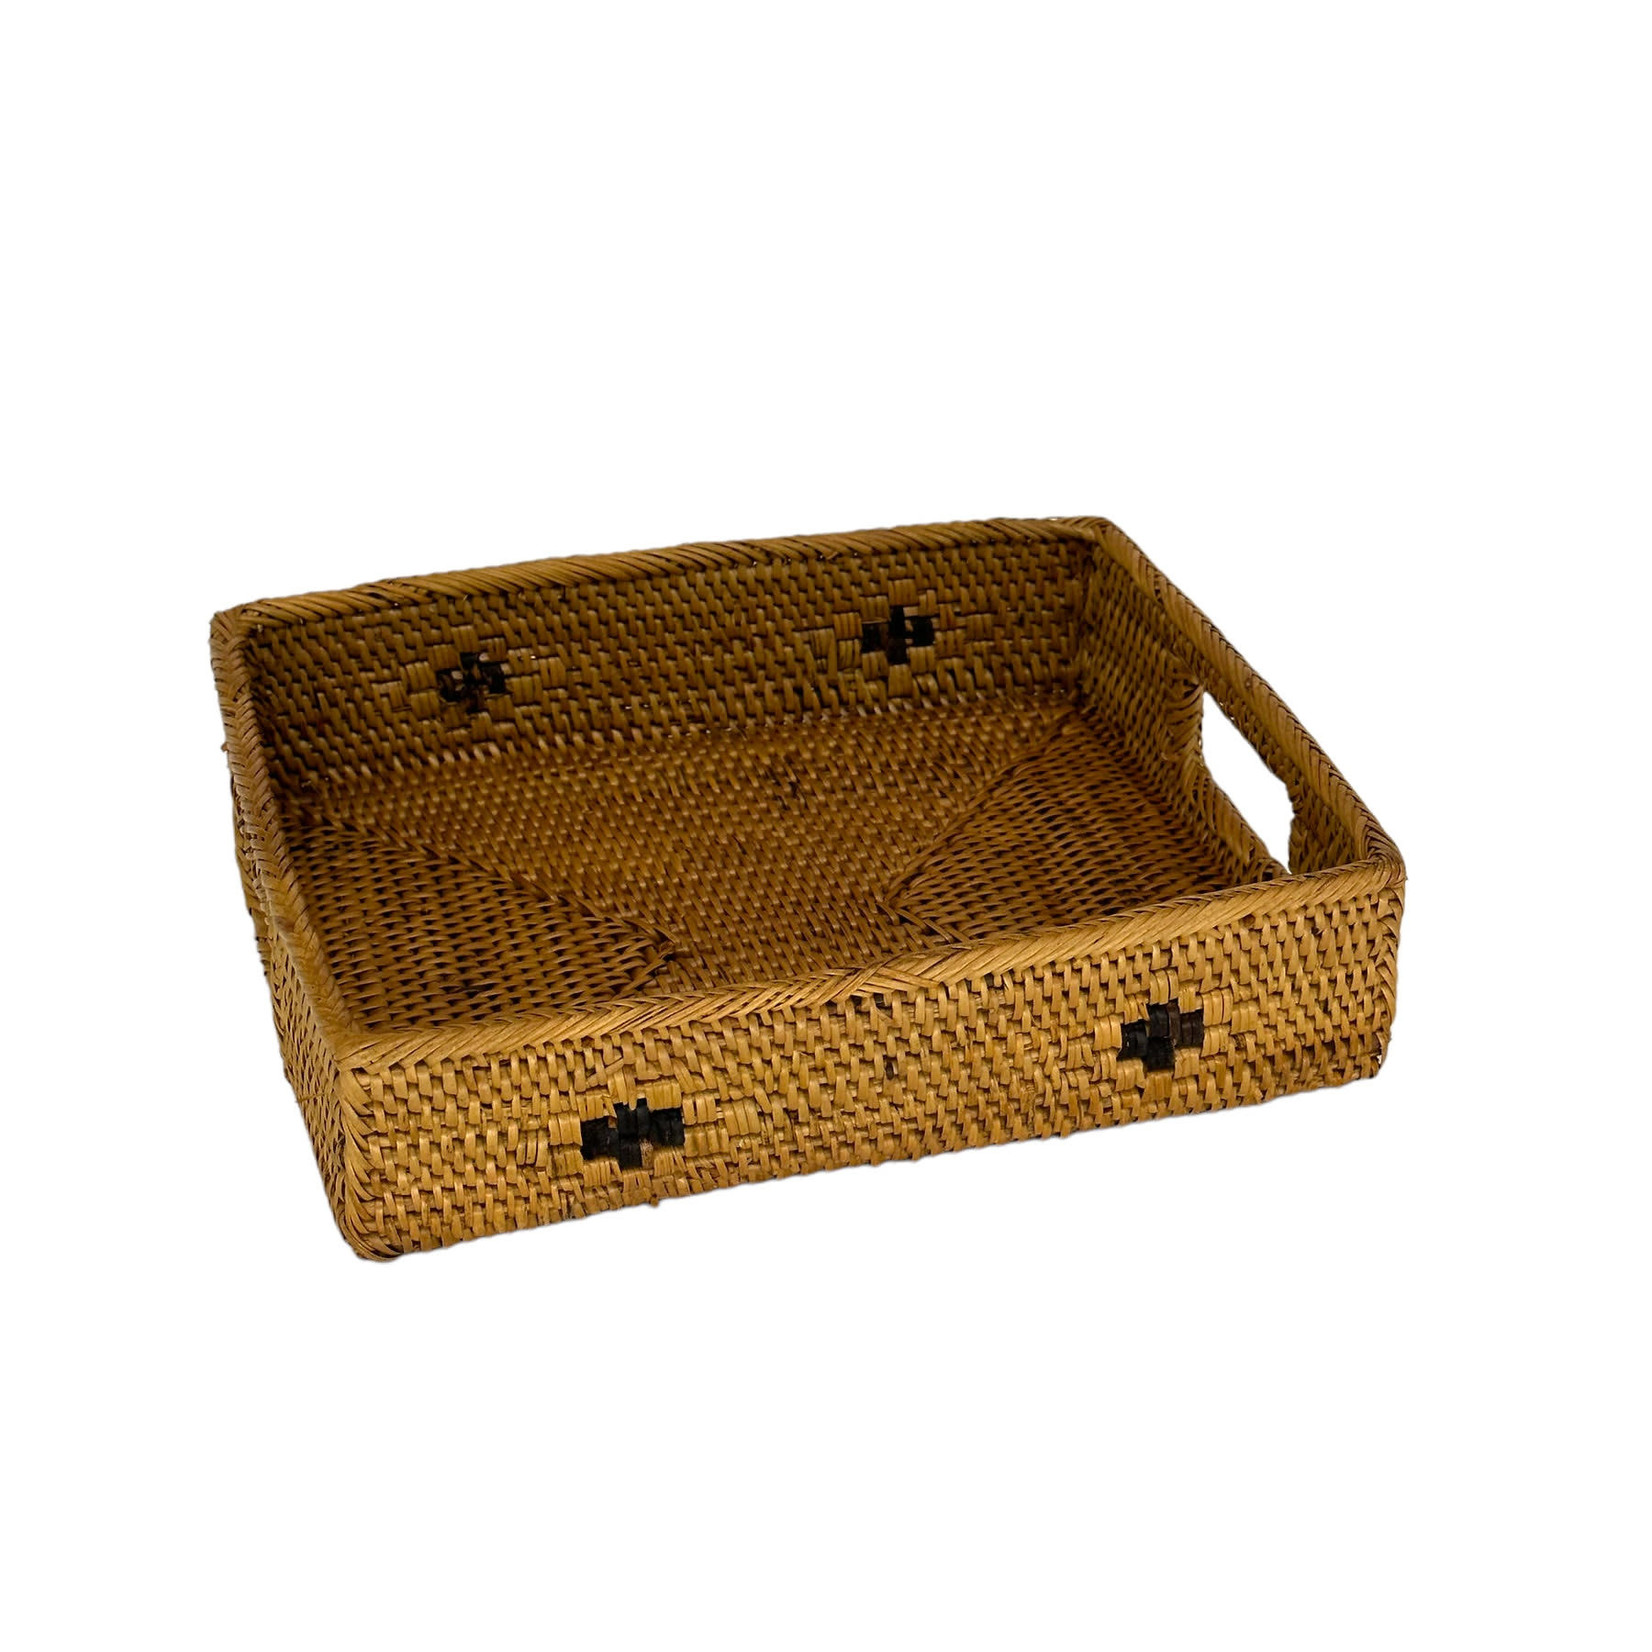 Hand Woven Ata  Basket #33 Tray with Design and Handles